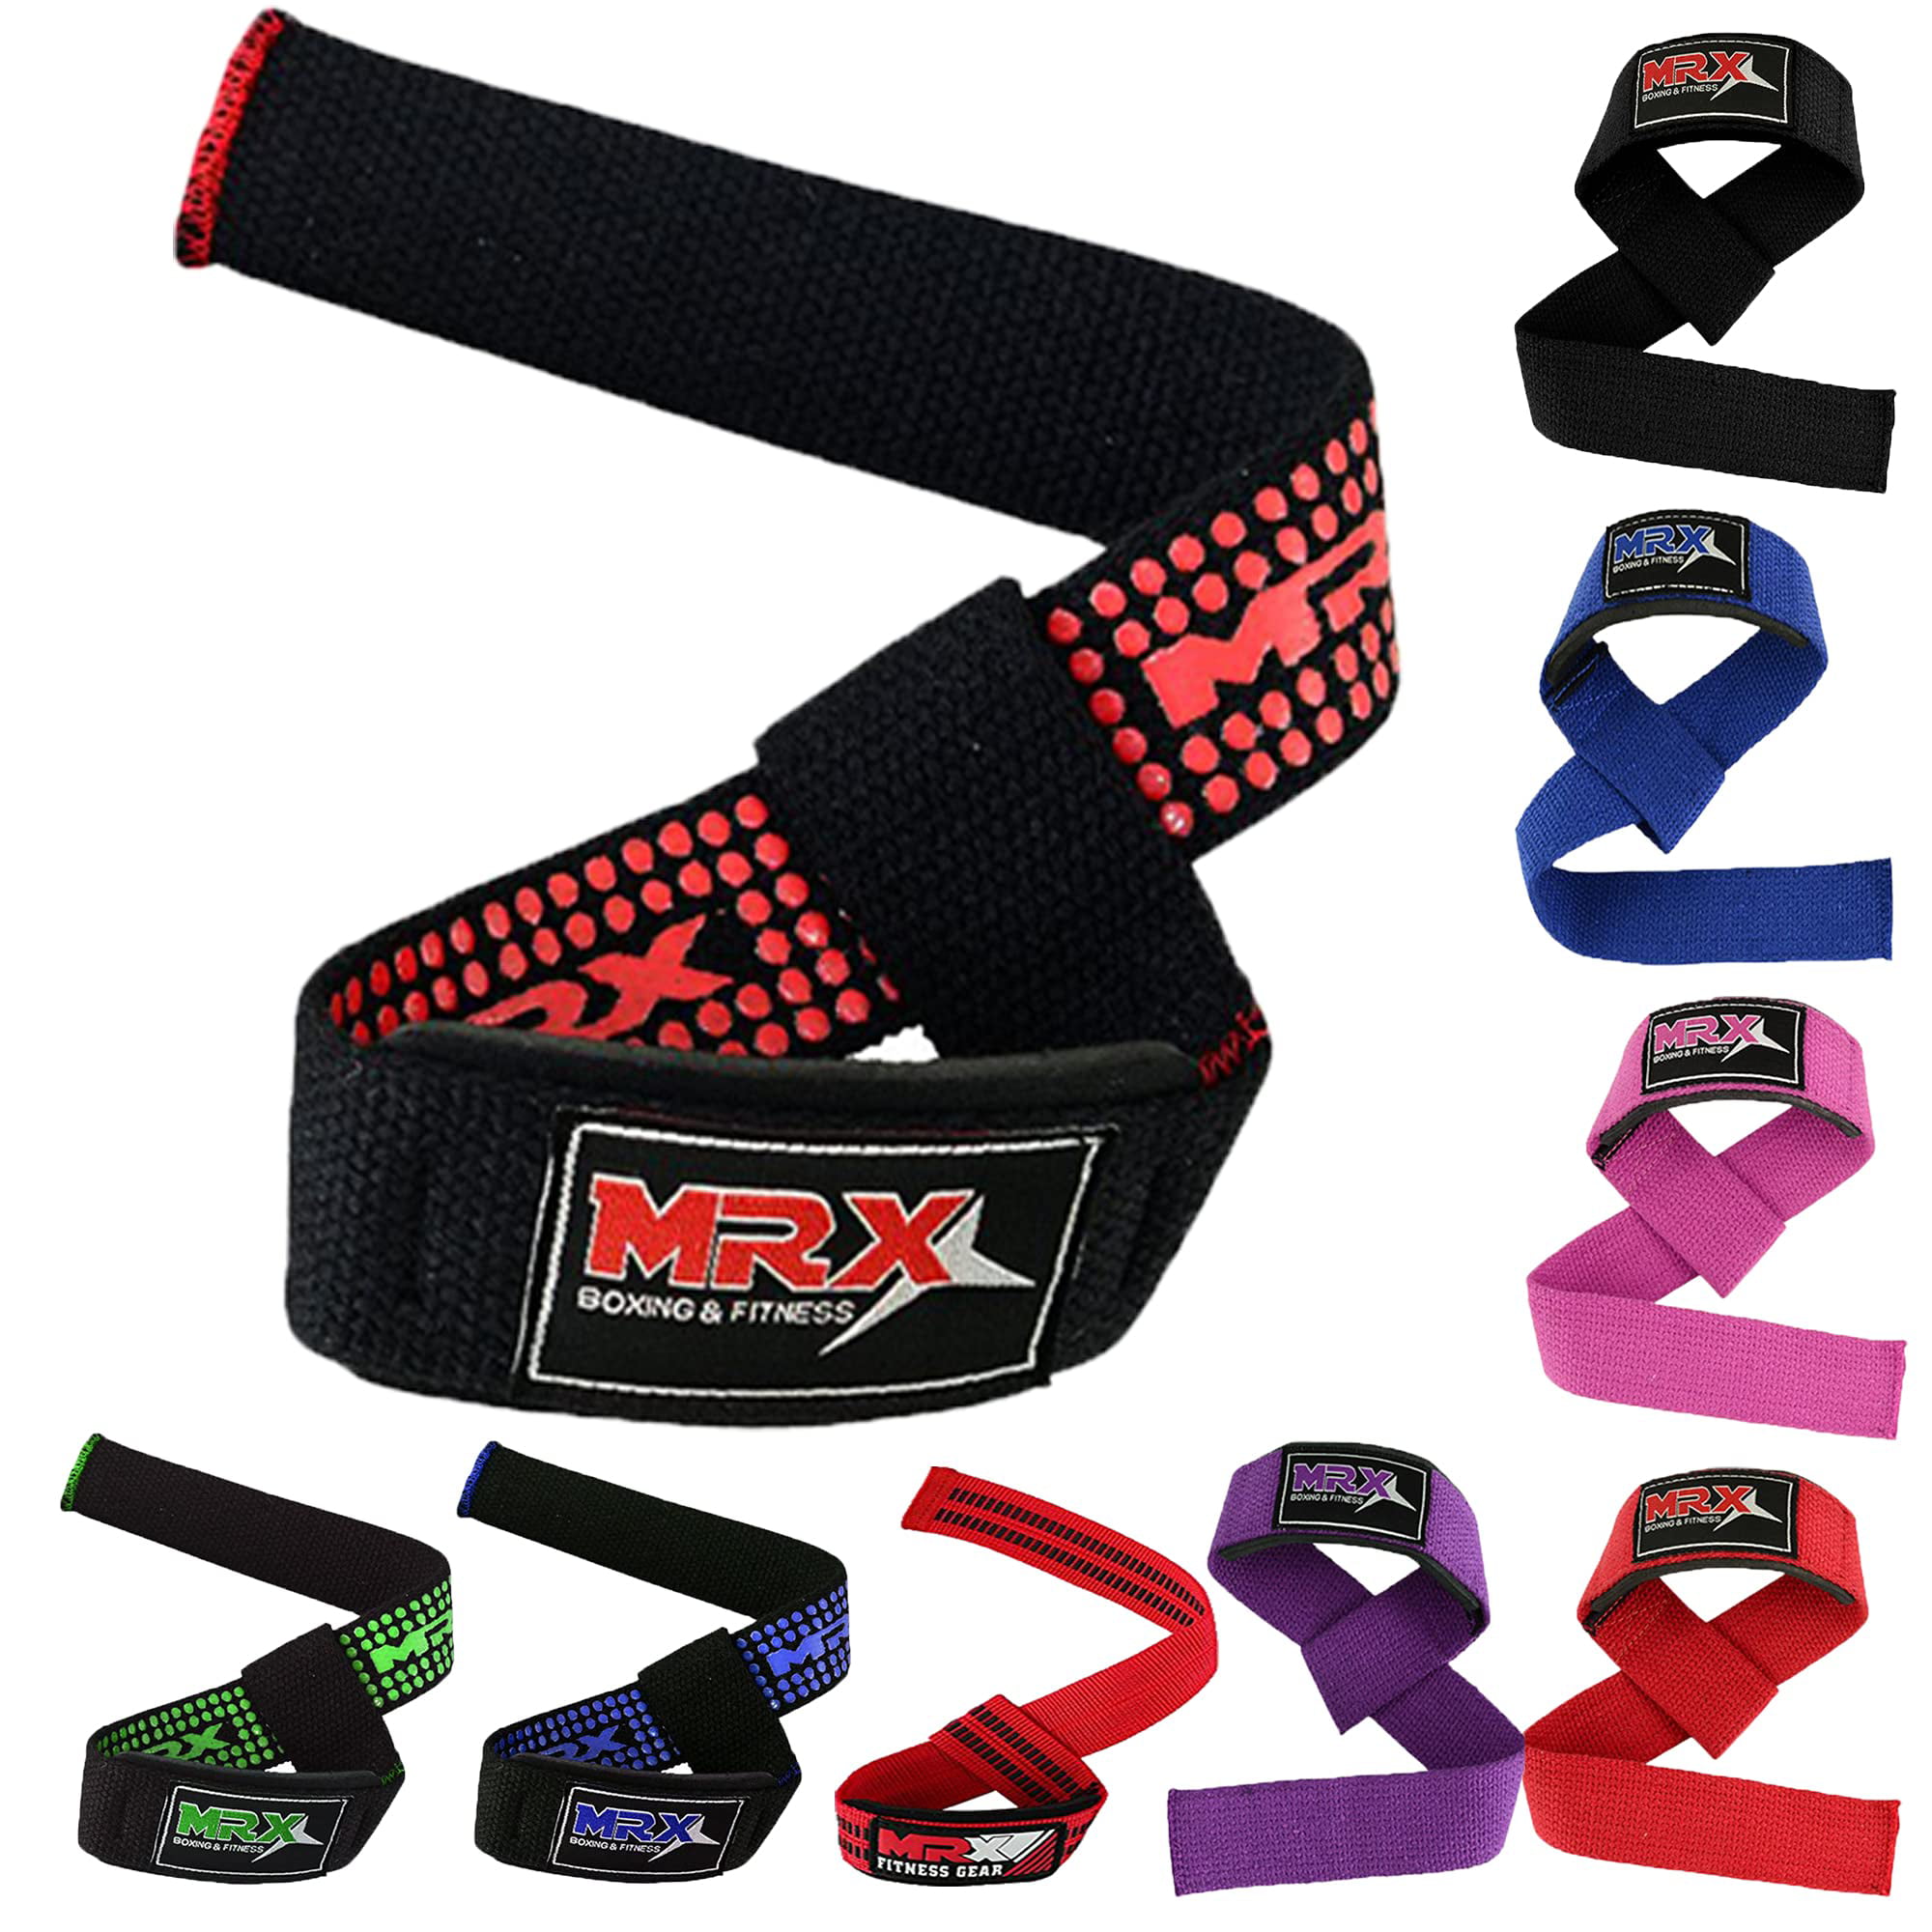 Everlast Weight Lifting Straps New In Packaging Cotton 